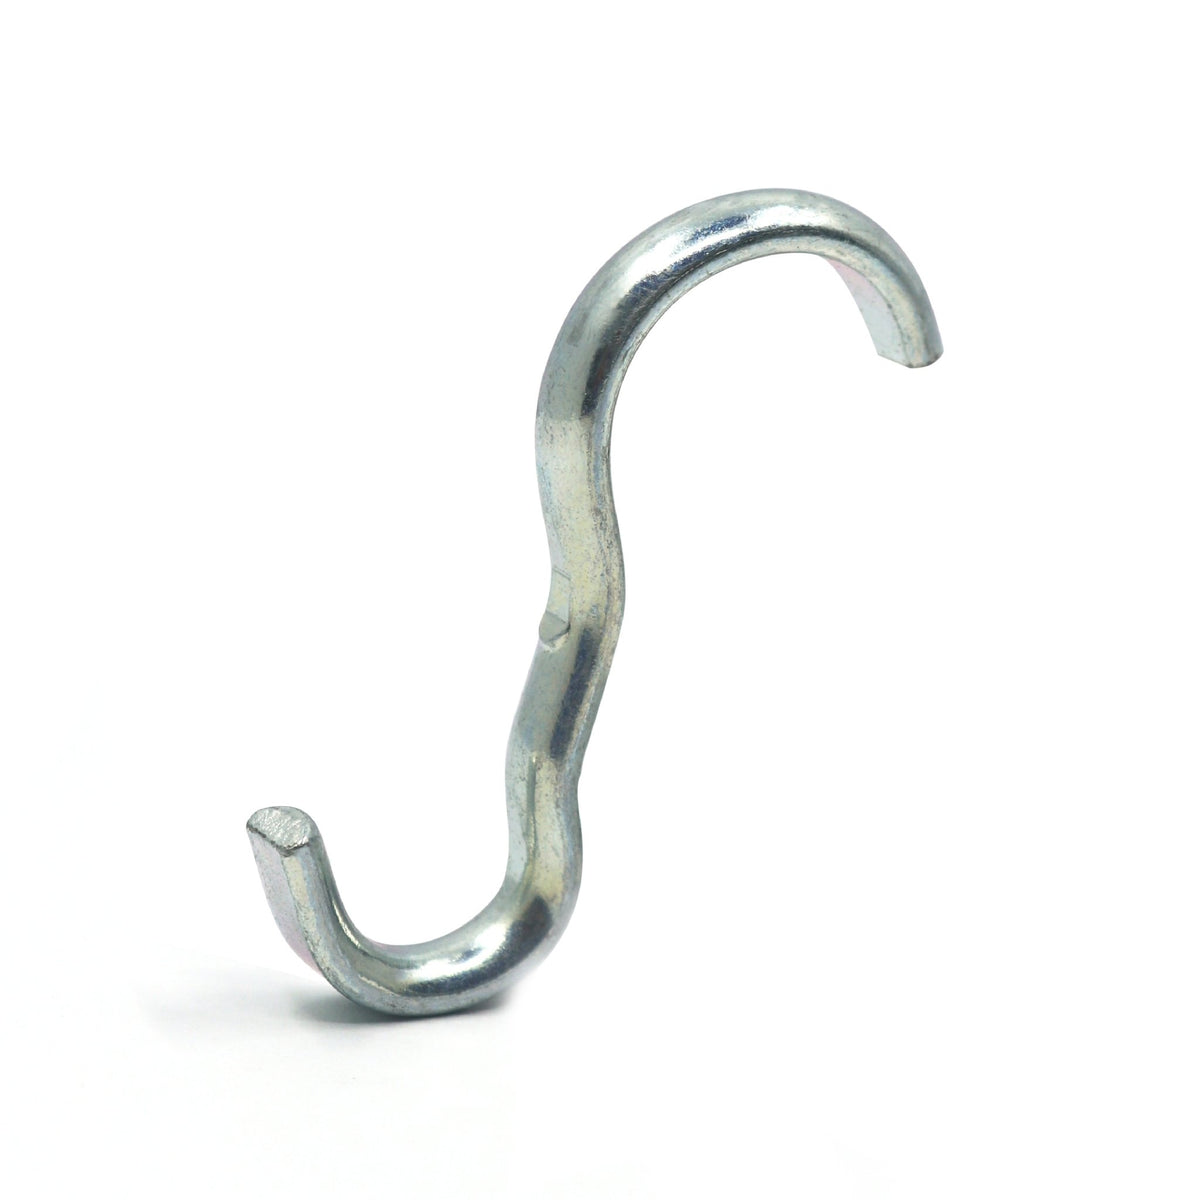 Narrow Picture Rail Hook Zinc/Silver - HWR-1226X - Picture Hang Solutions